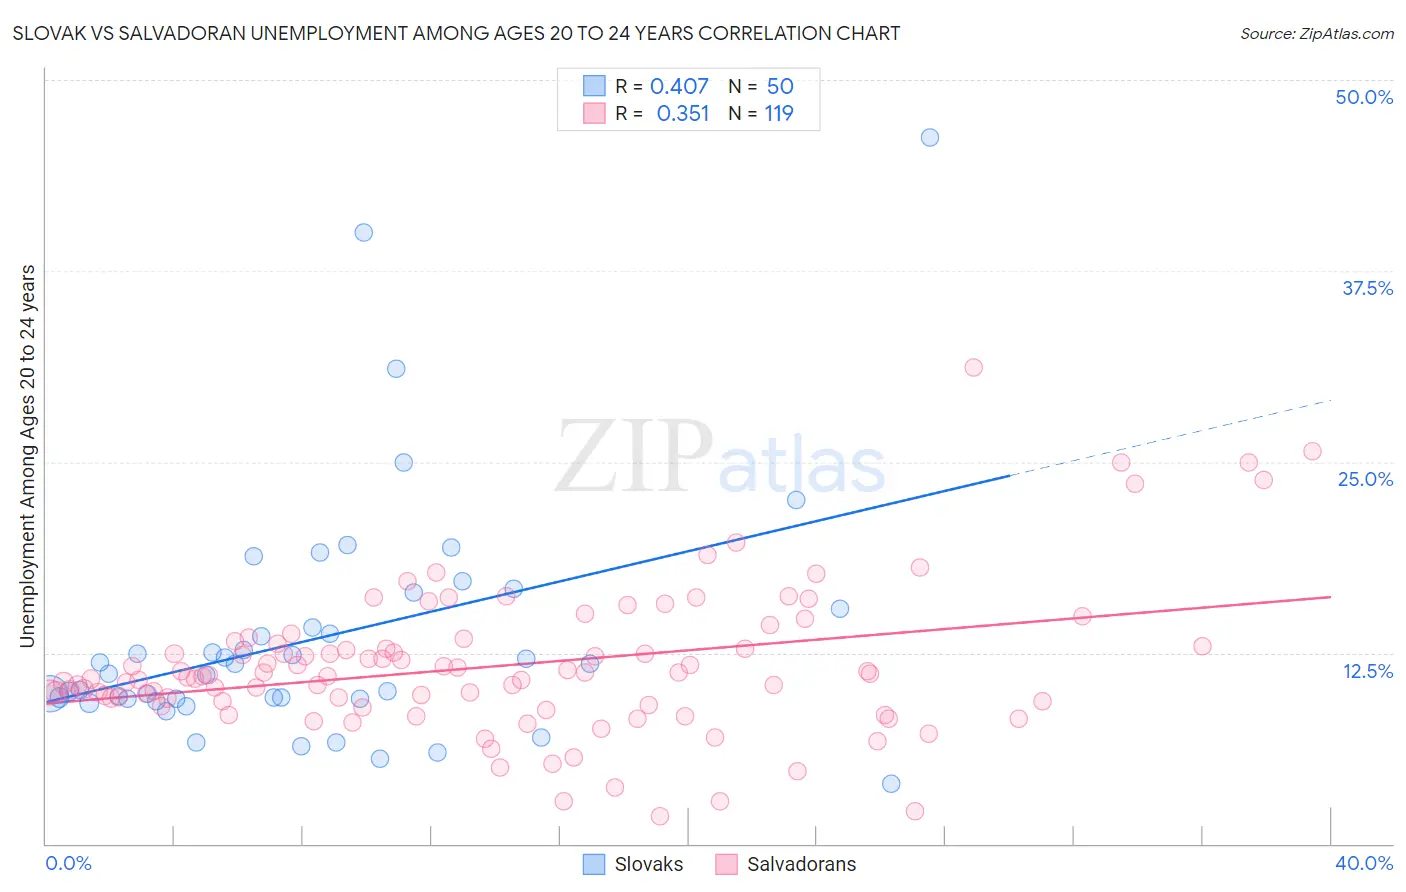 Slovak vs Salvadoran Unemployment Among Ages 20 to 24 years